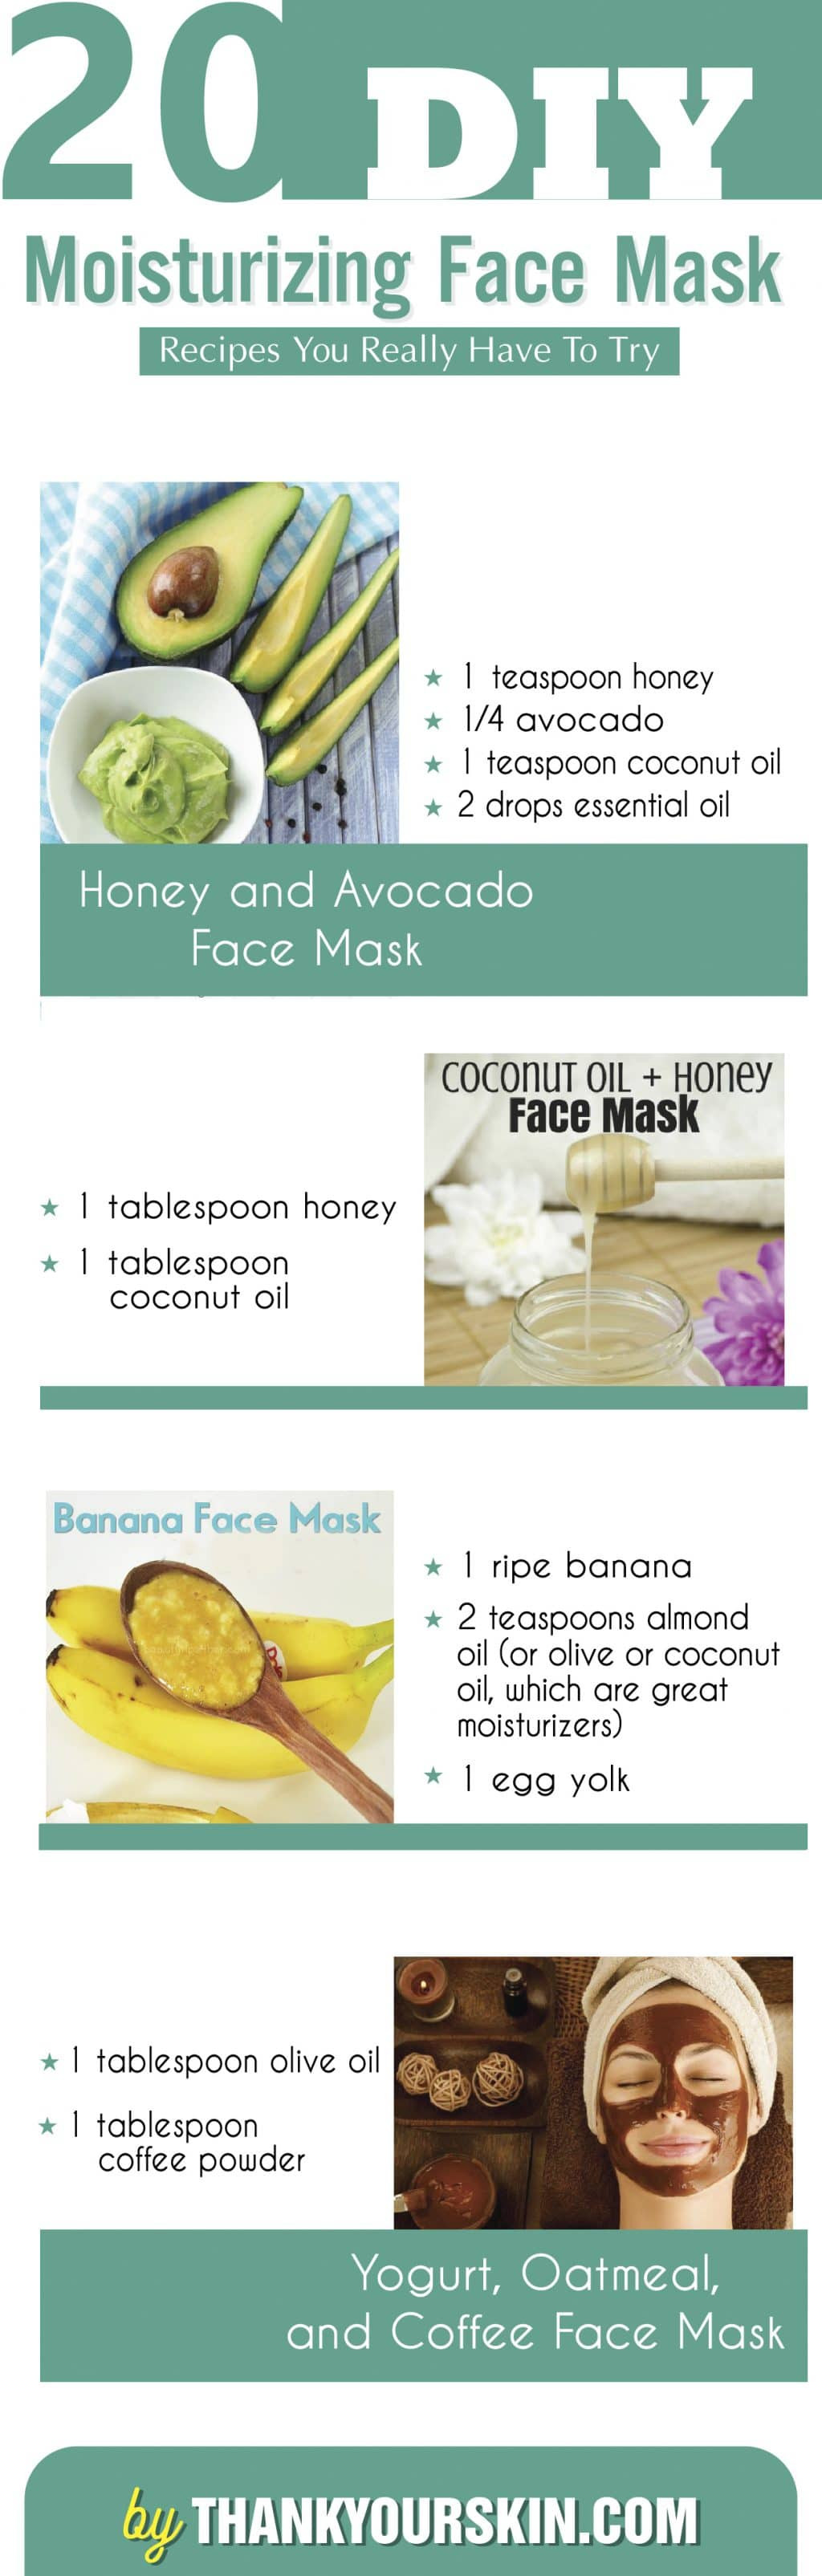 Best ideas about Moisturizing Mask DIY
. Save or Pin 20 DIY Moisturizing Face Mask Recipes You Really Have to Try Now.